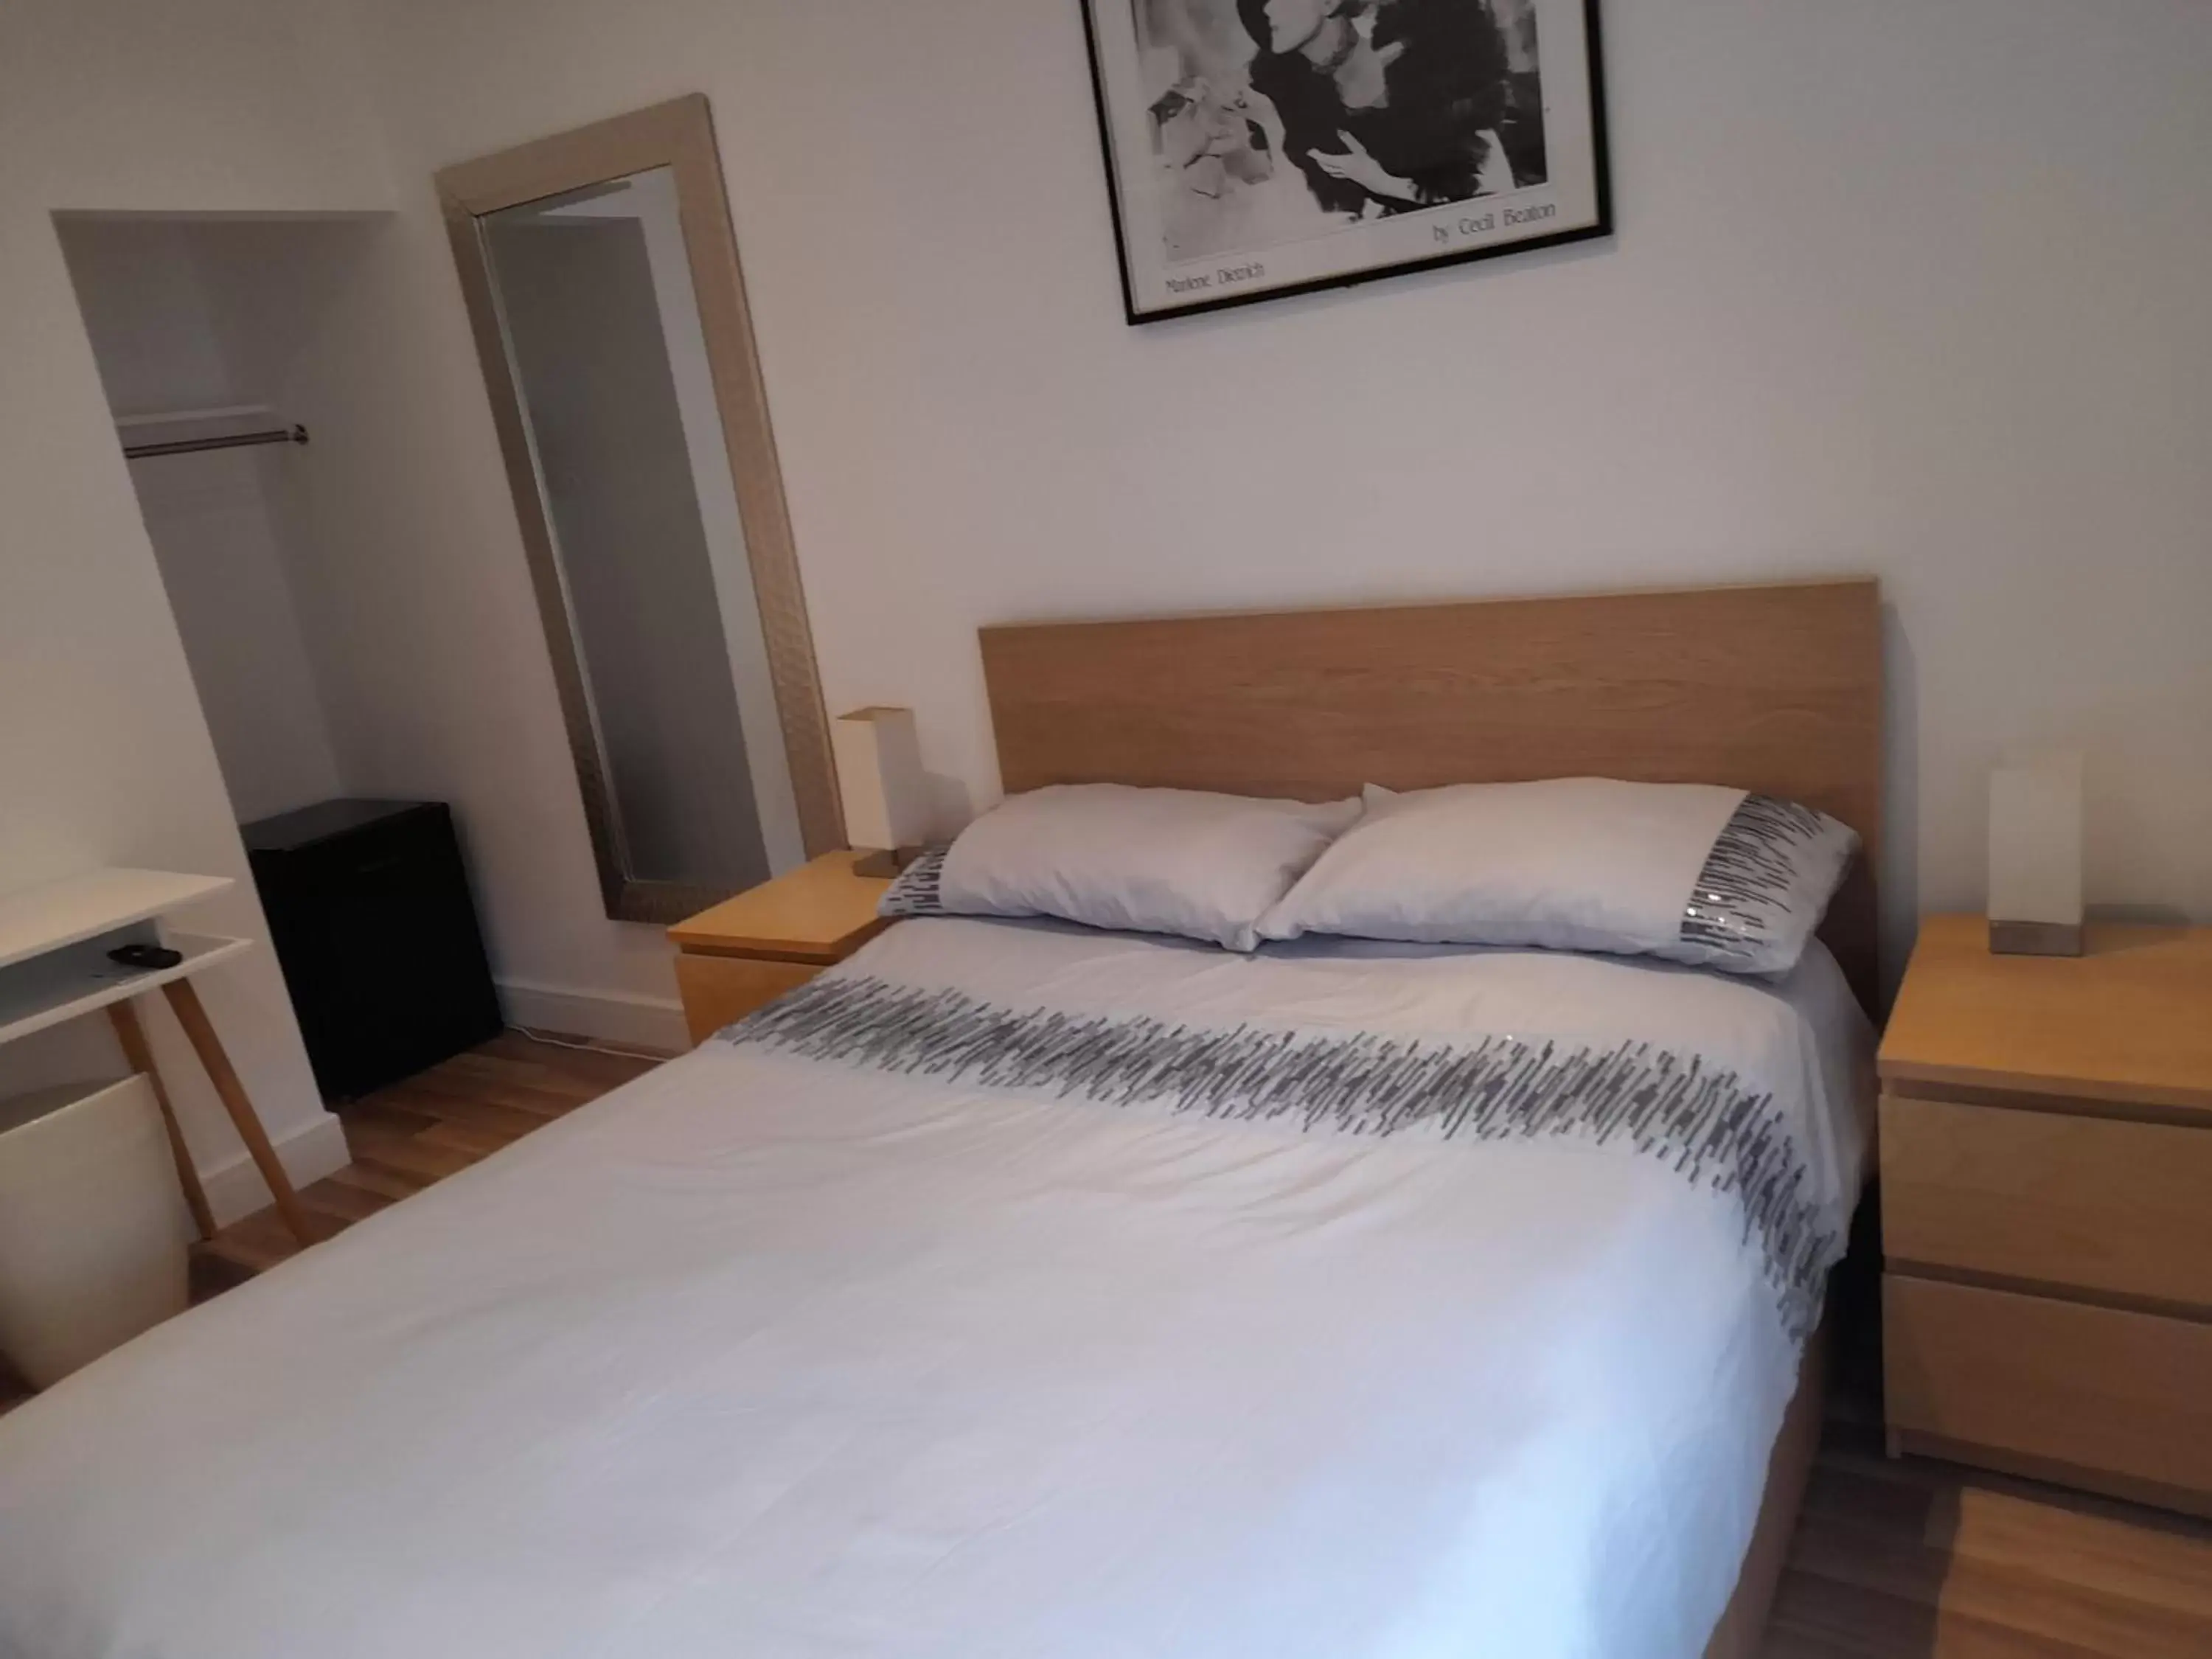 Bedroom, Bed in Lovely Home with full en-suite double bed rooms